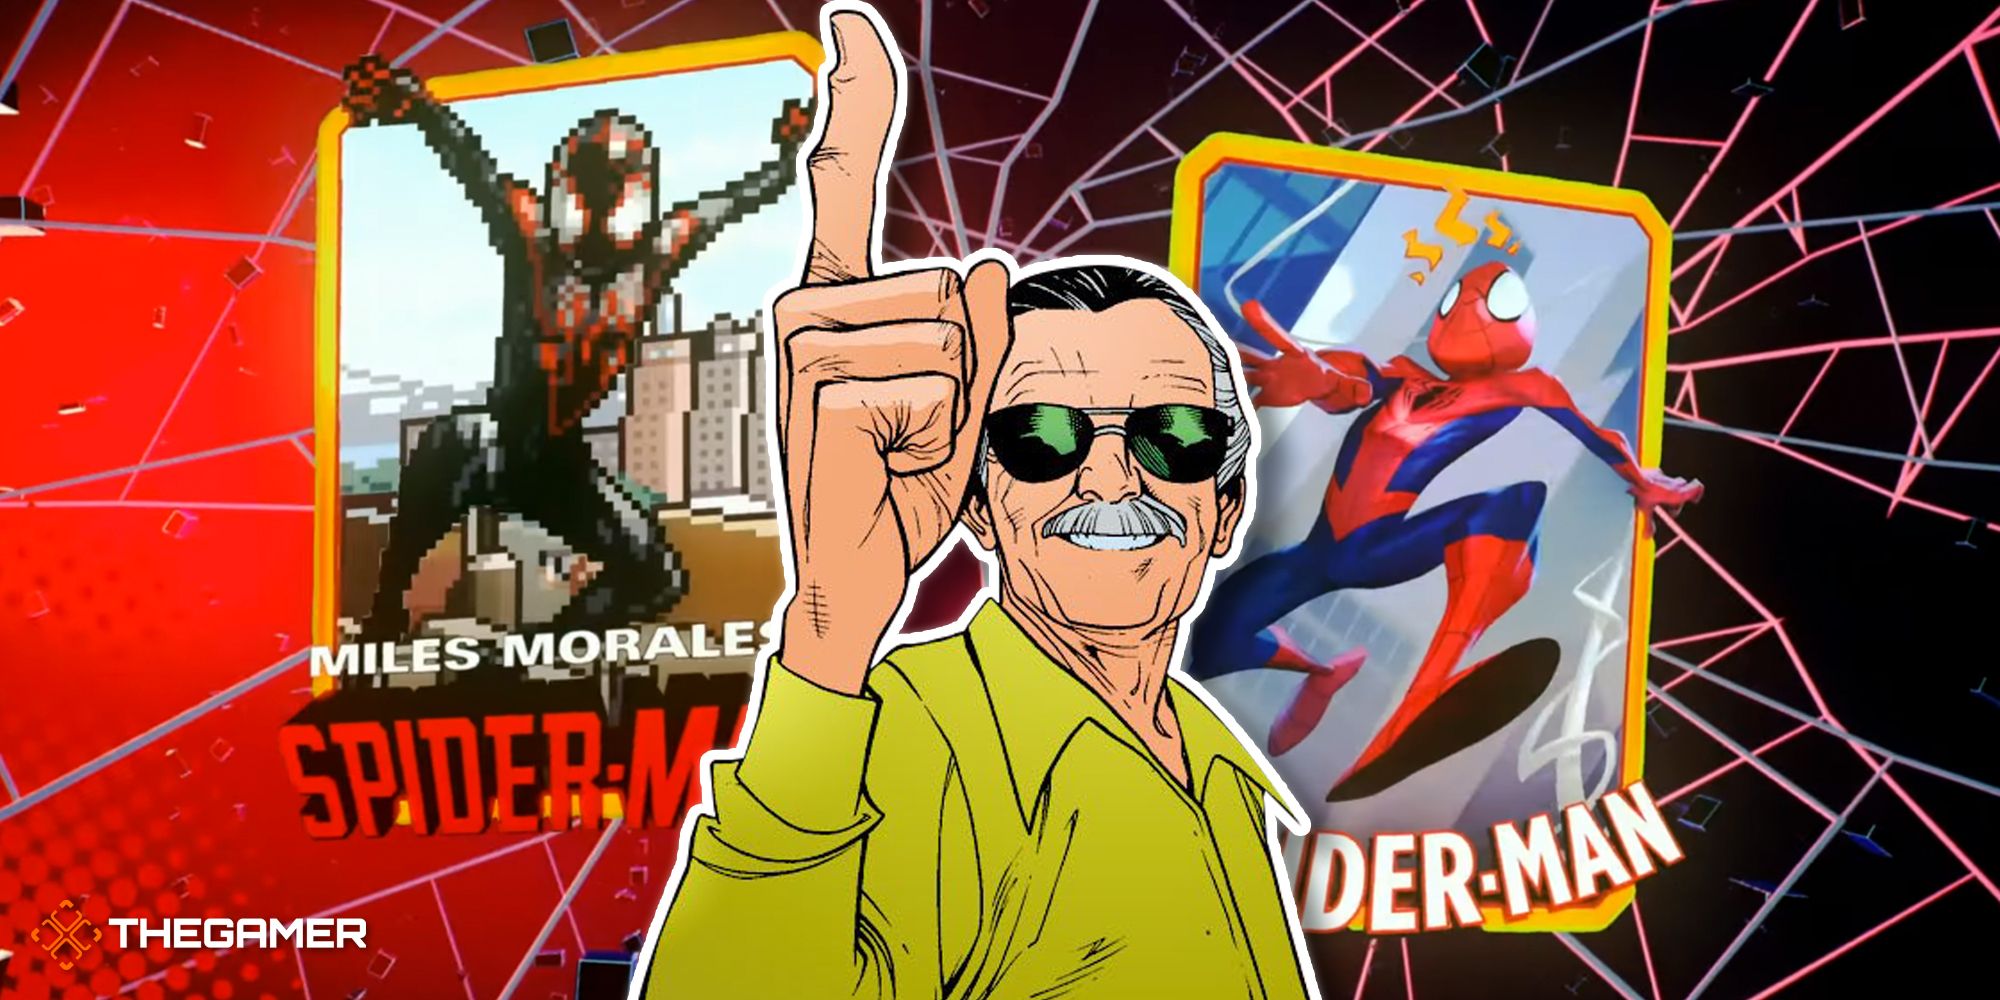 stan lee pointing in front of marvel snap spider-man cards